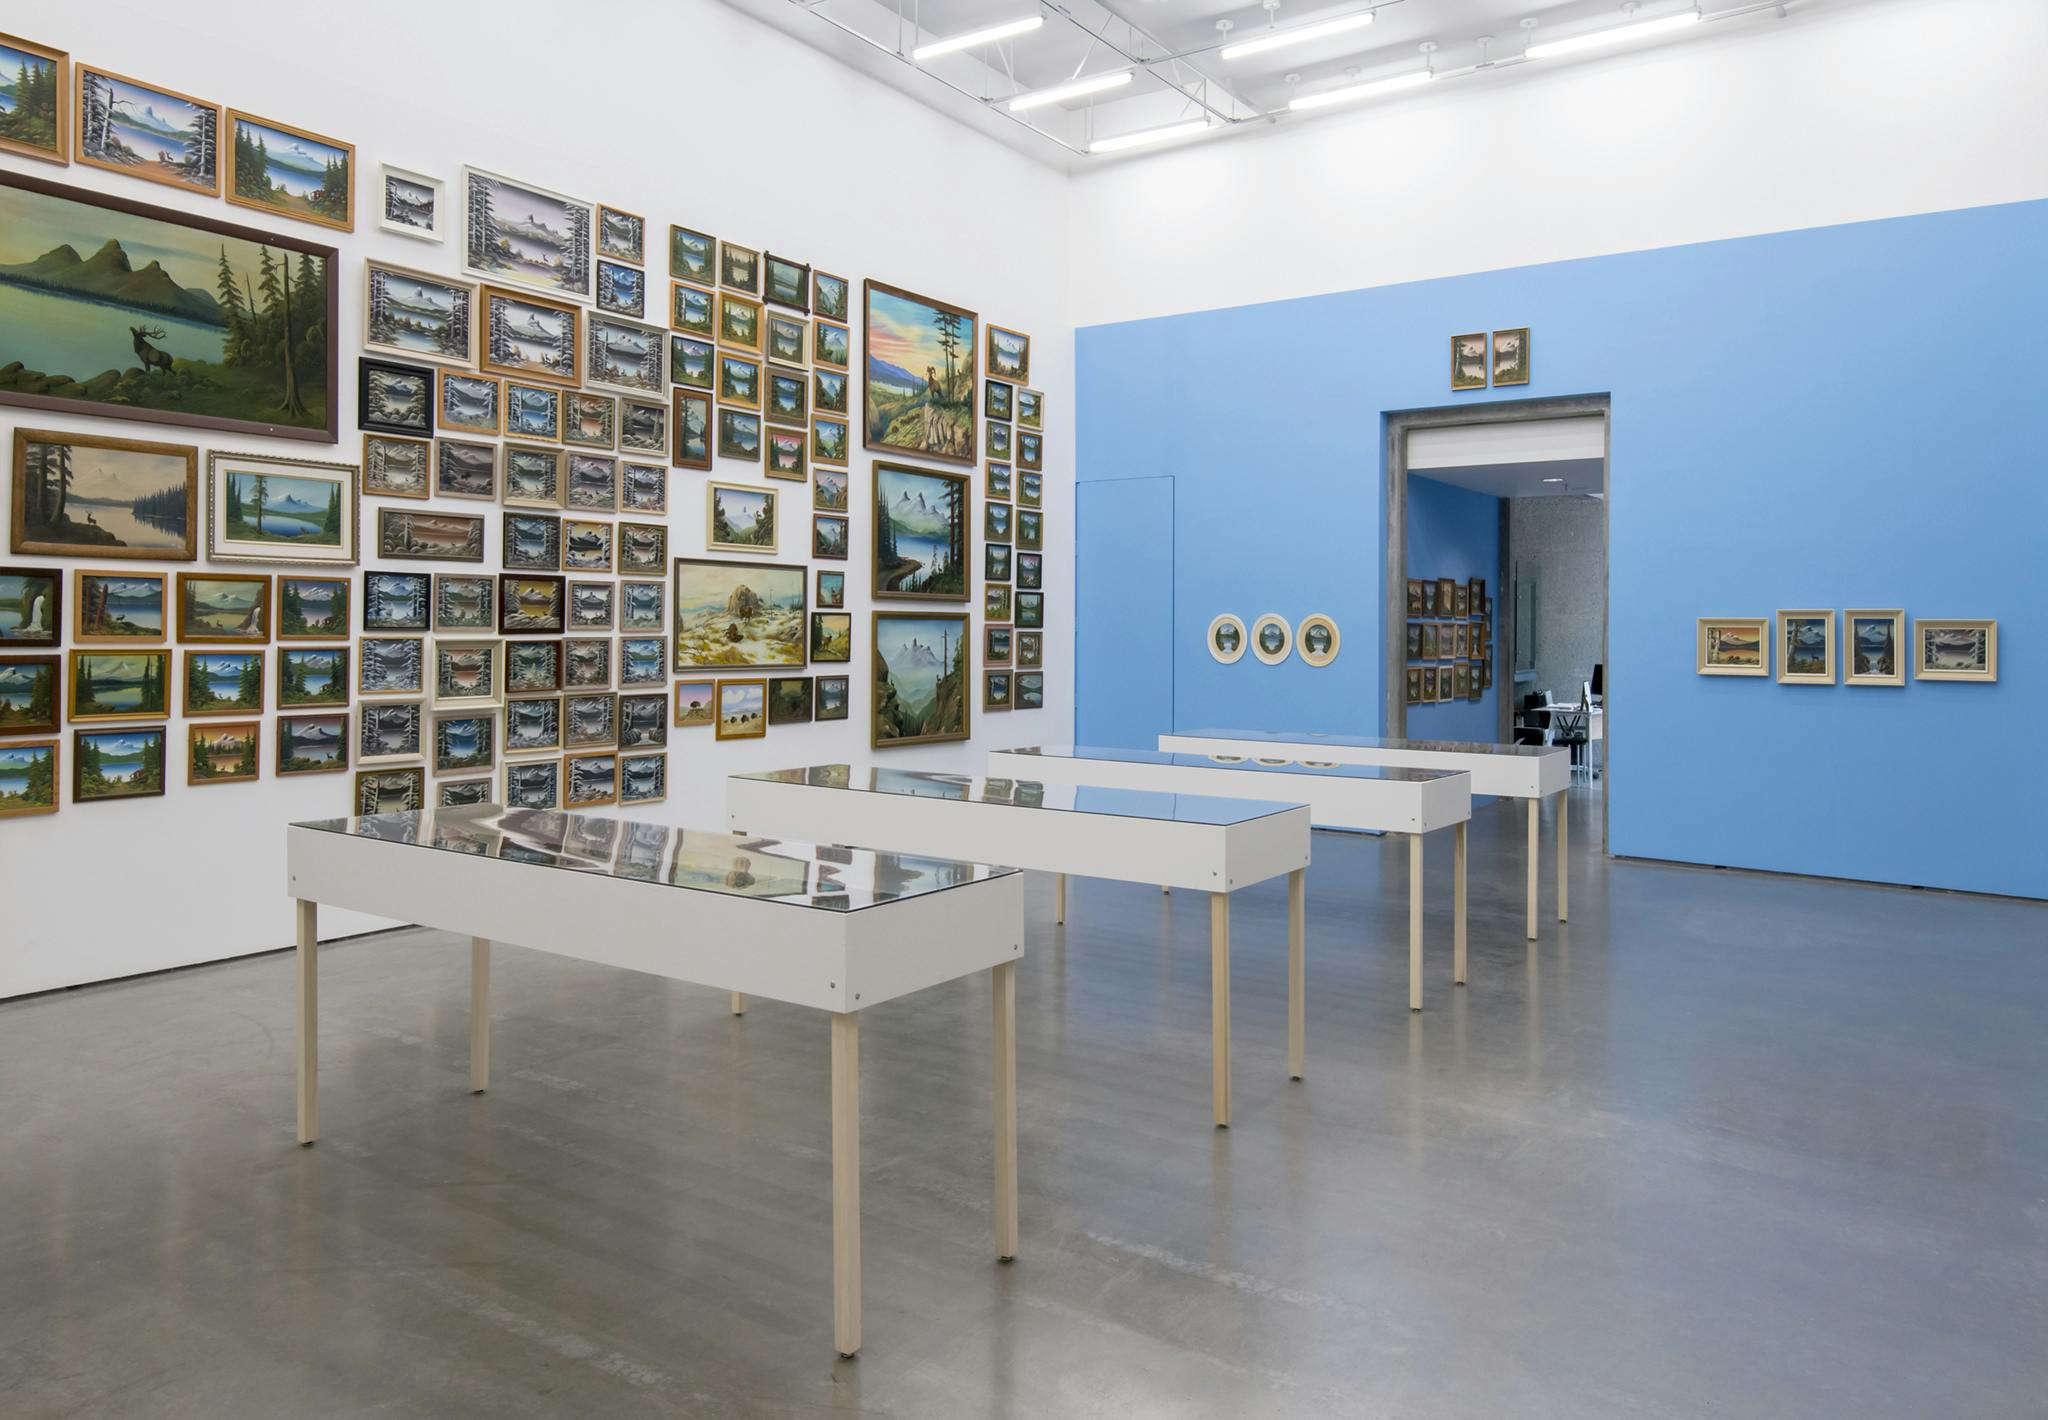 Multiple framed paintings of similar mountain landscapes cover one wall of a gallery. An adjacent wall is painted bright blue and nine more landscape paintings hang. Four vitrines sit in the center.